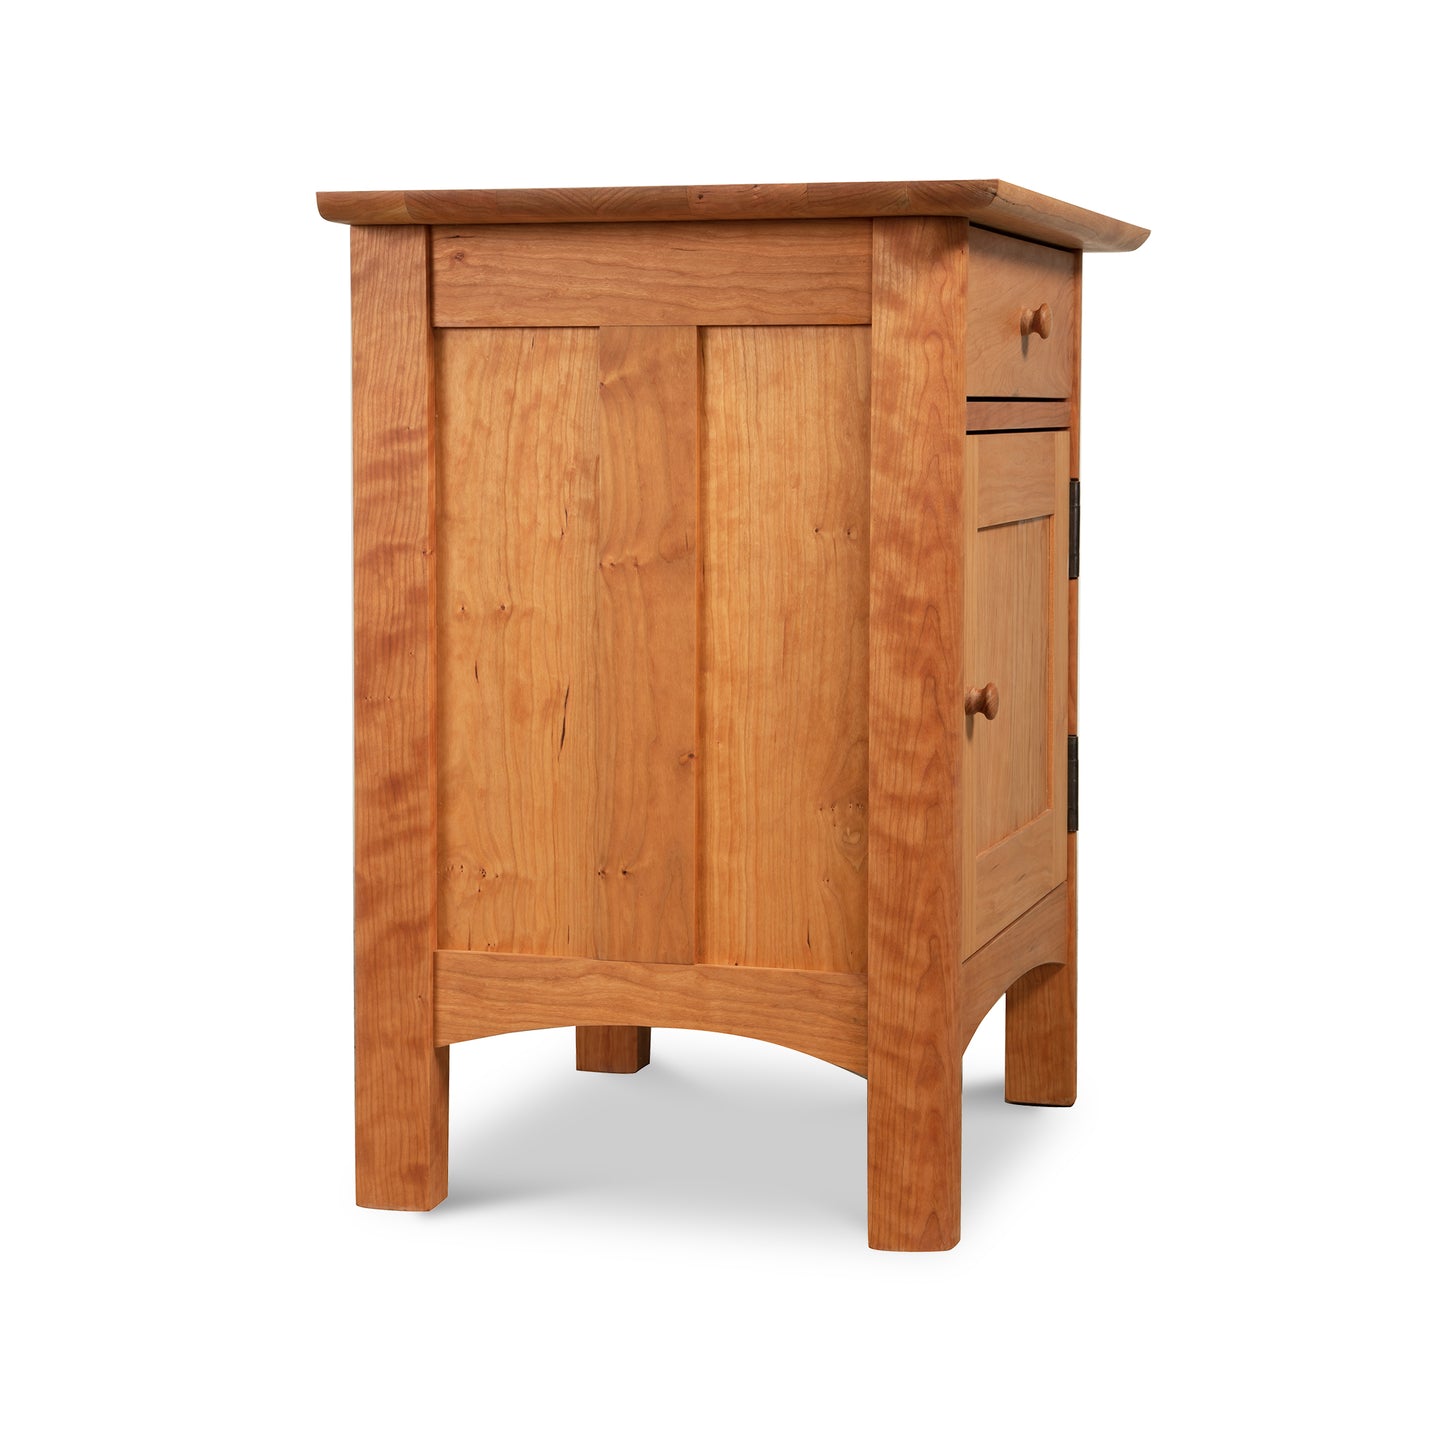 Heartwood Shaker 1-Drawer Nightstand with Door: Solid wood nightstand with a single drawer and a door, featuring an eco-friendly oil finish, isolated on a white background. Designed by Vermont Furniture Designs.